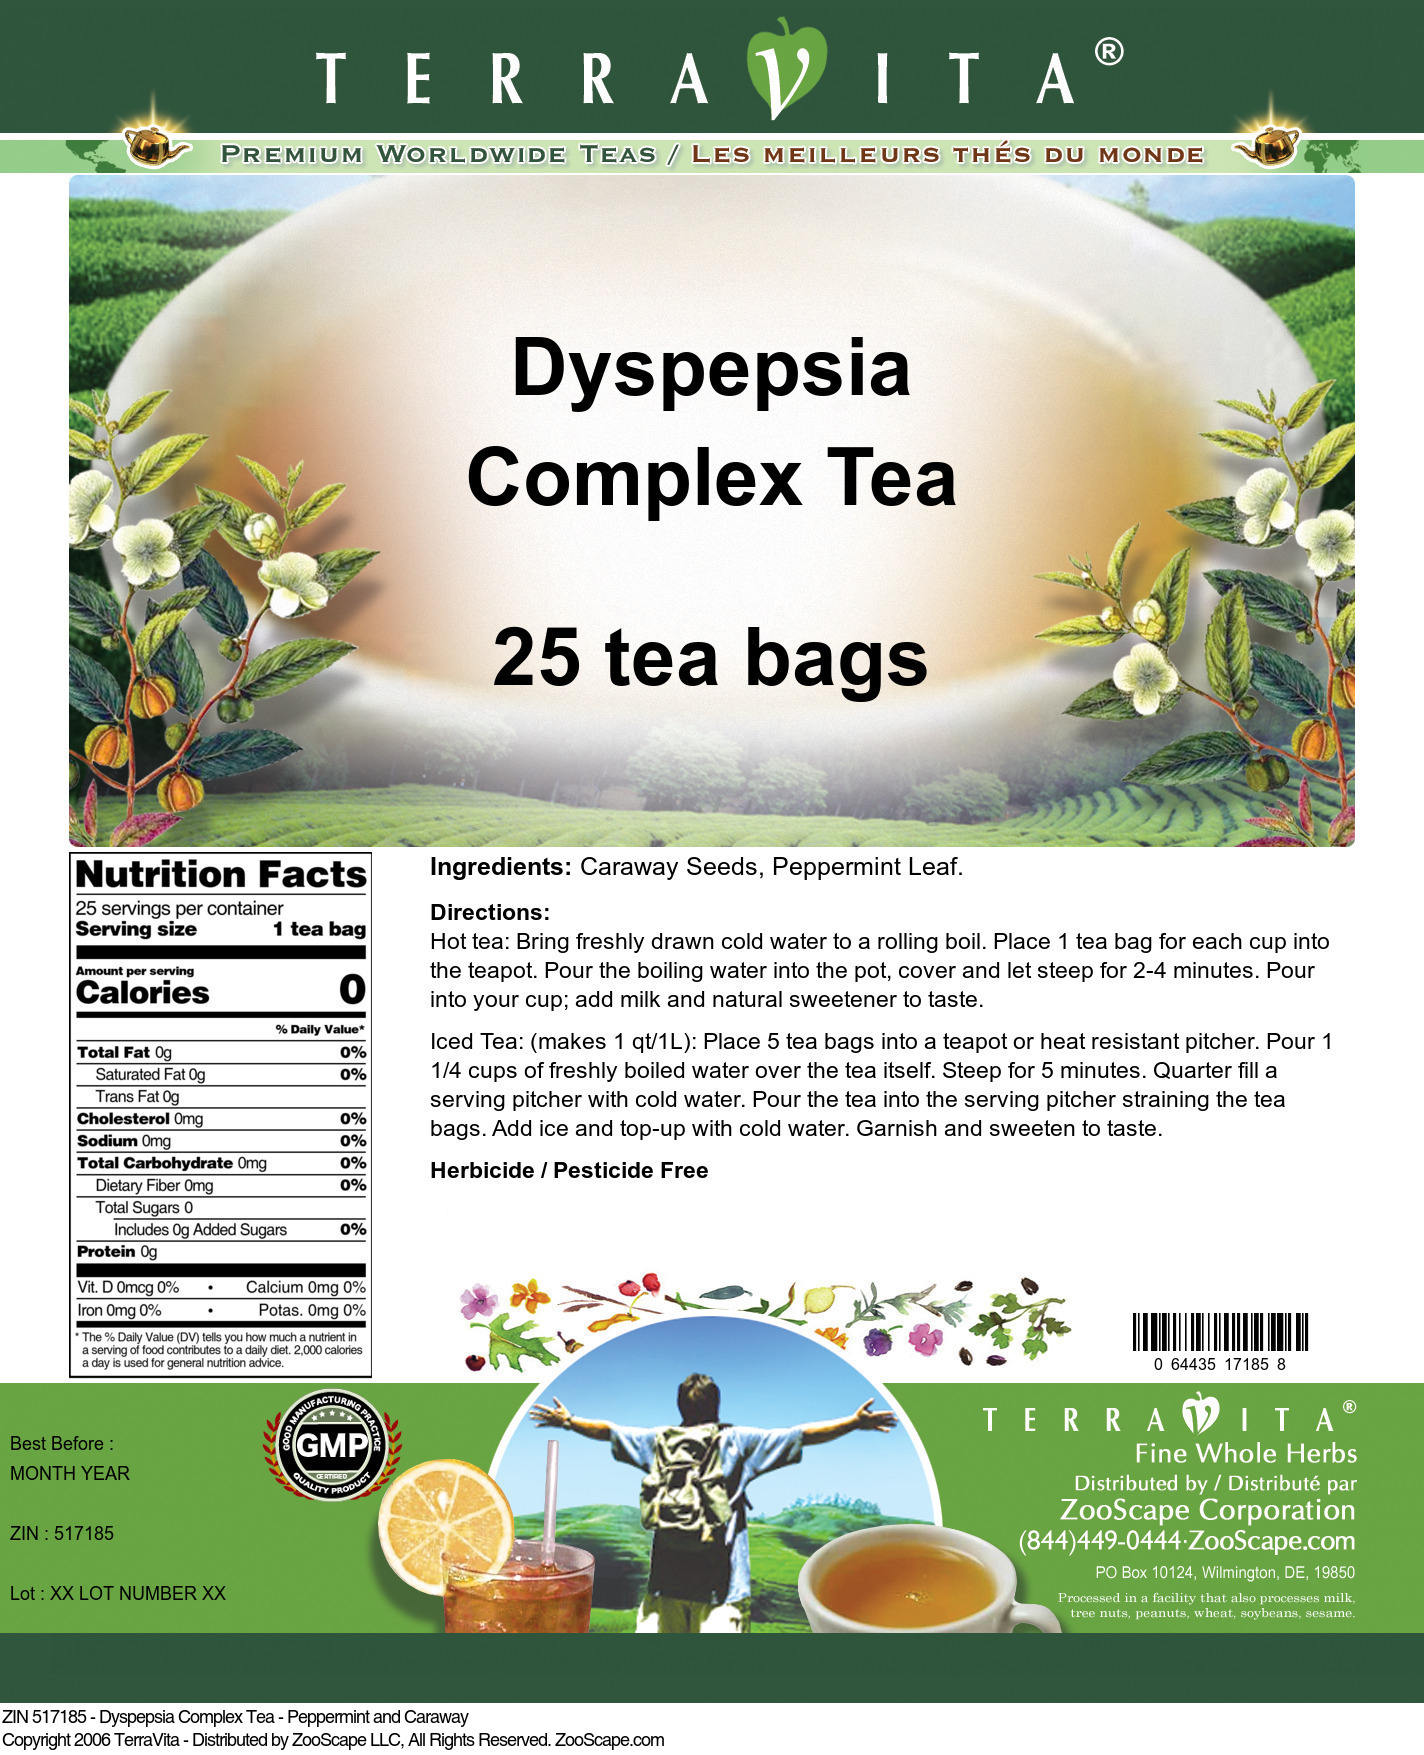 Dyspepsia Complex Tea - Peppermint and Caraway - Label